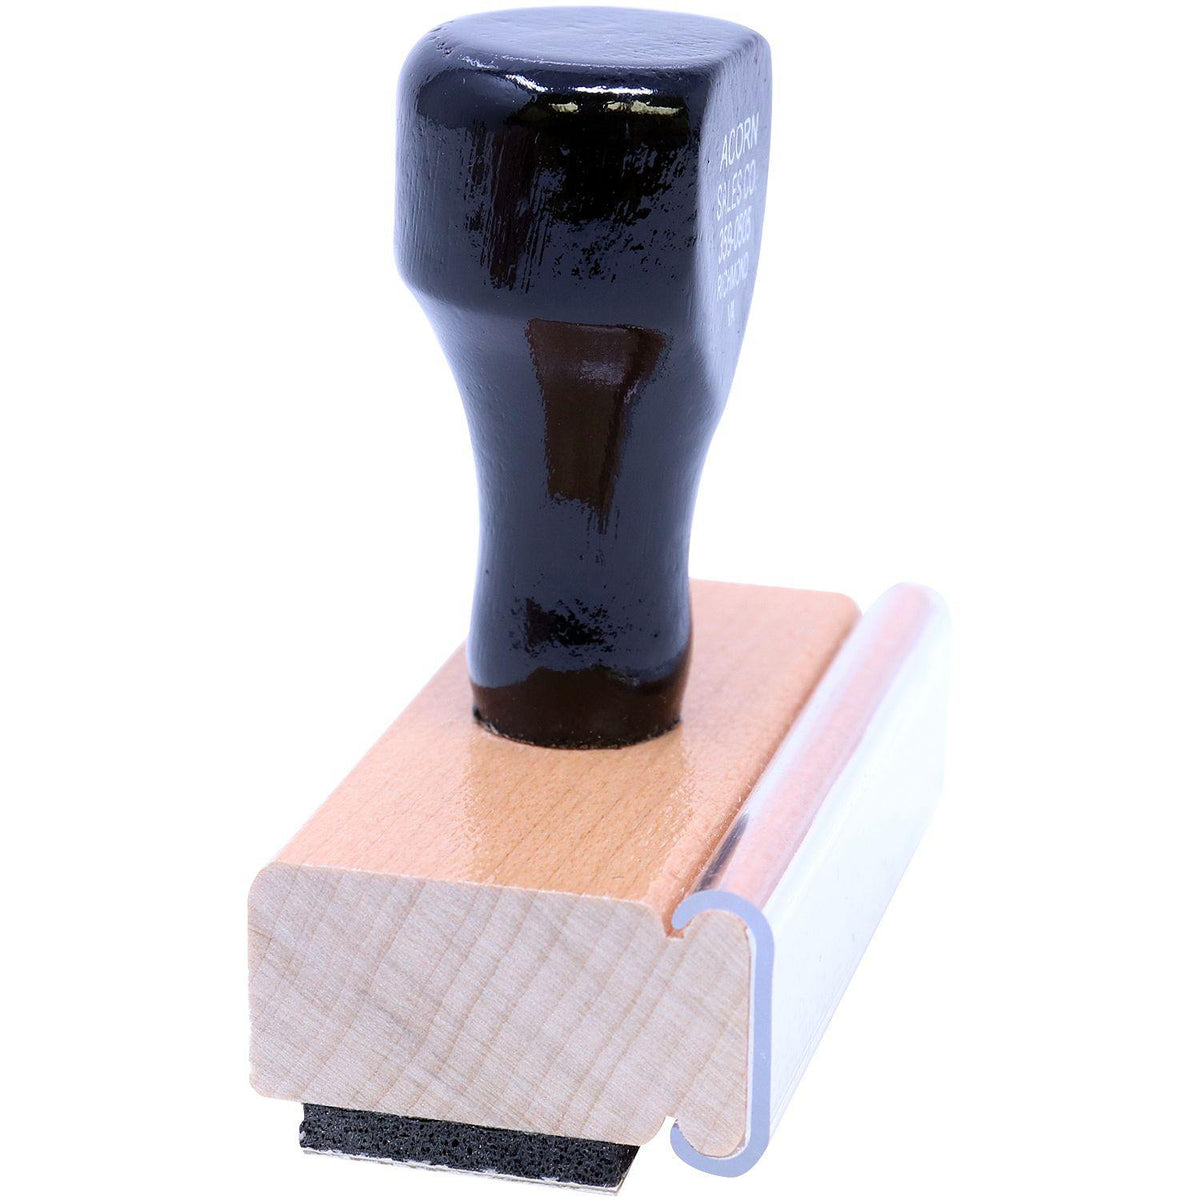 No Known Allergies Rubber Stamp - Engineer Seal Stamps - Brand_Acorn, Impression Size_Small, Stamp Type_Regular Stamp, Type of Use_Medical Office